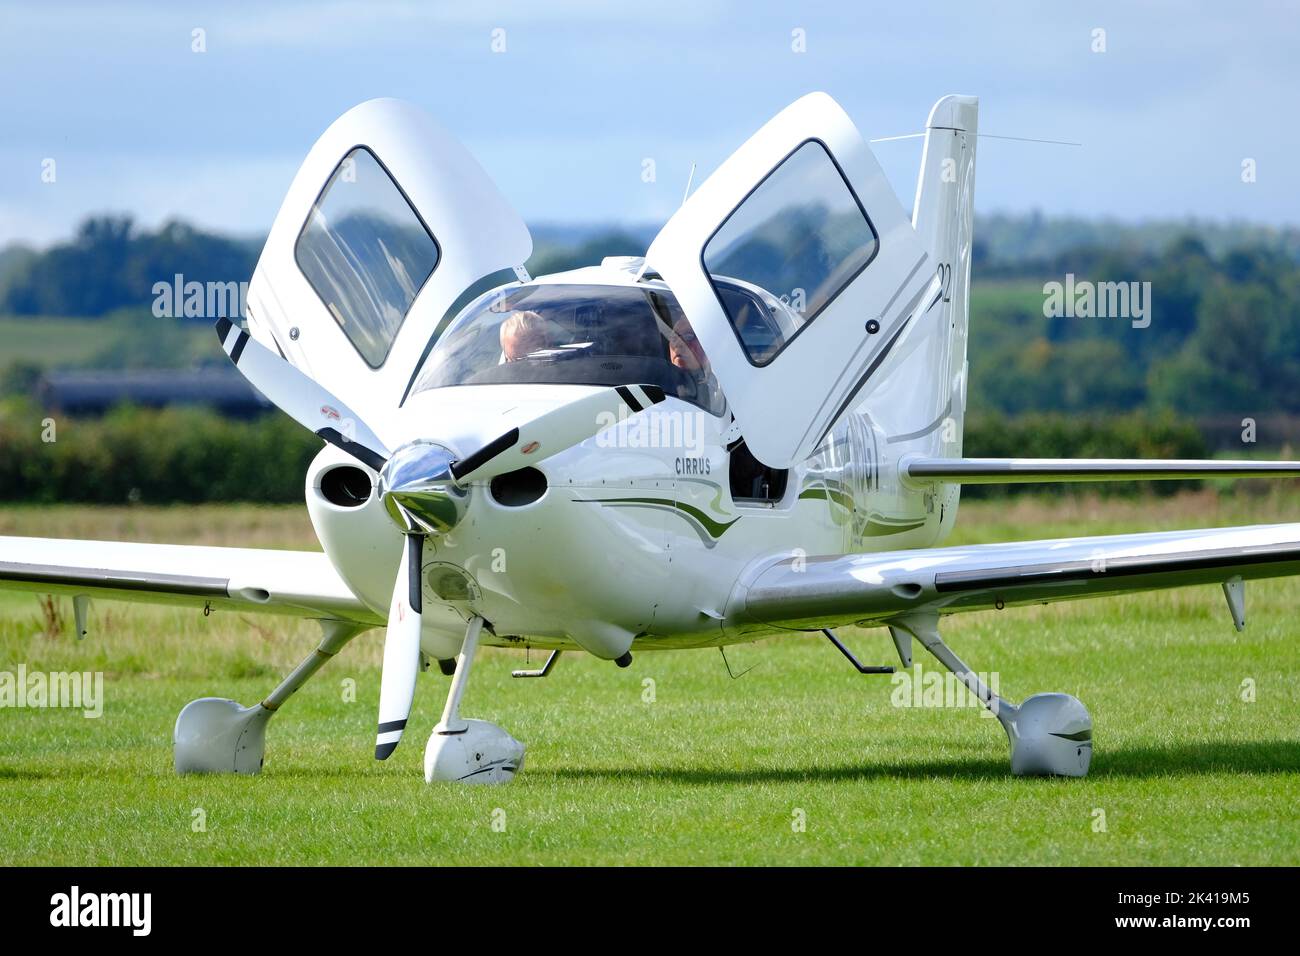 Cirrus SR22 modern popular US built light aircraft made from composite material with cockpit doors open Stock Photo